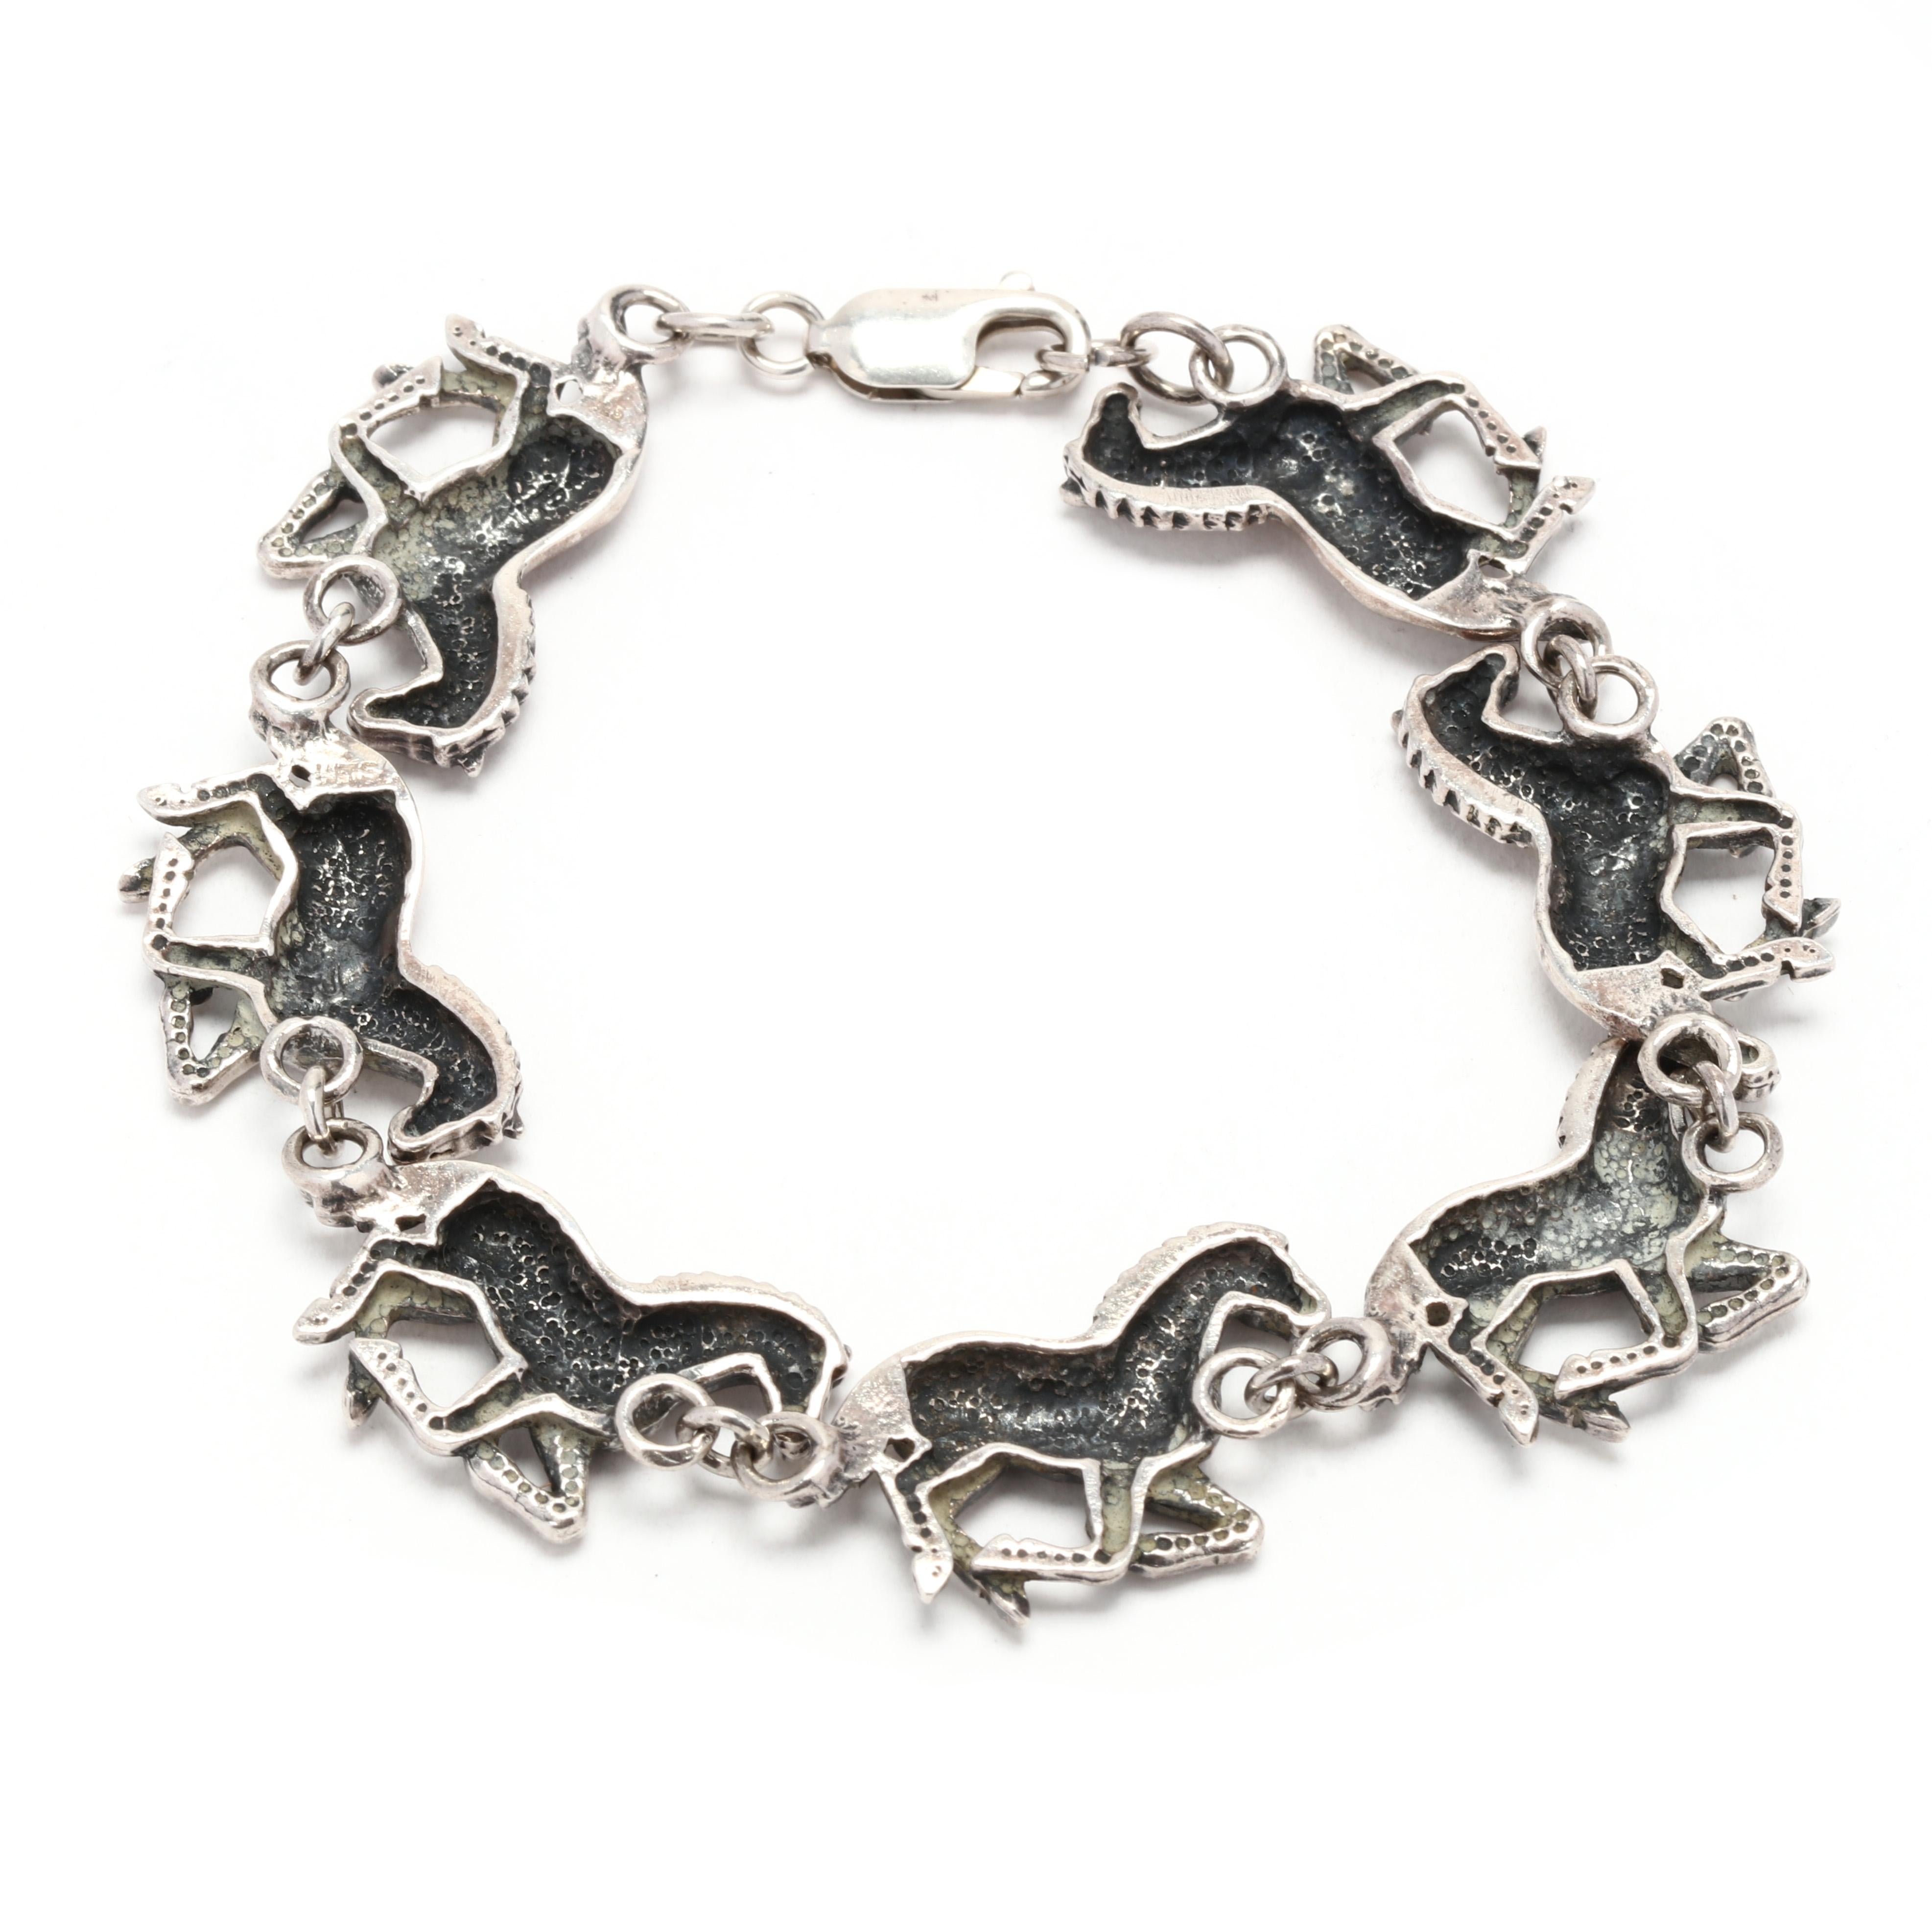 A sterling silver running horse bracelet.  This equestrian theme bracelet features seven links, each depicting a running horse, completed with a lobster clasp.  It is stamped 925.

Length: 8 inches

Width: 3/4 inch

Weight: 15.9 dwt. / 24.7